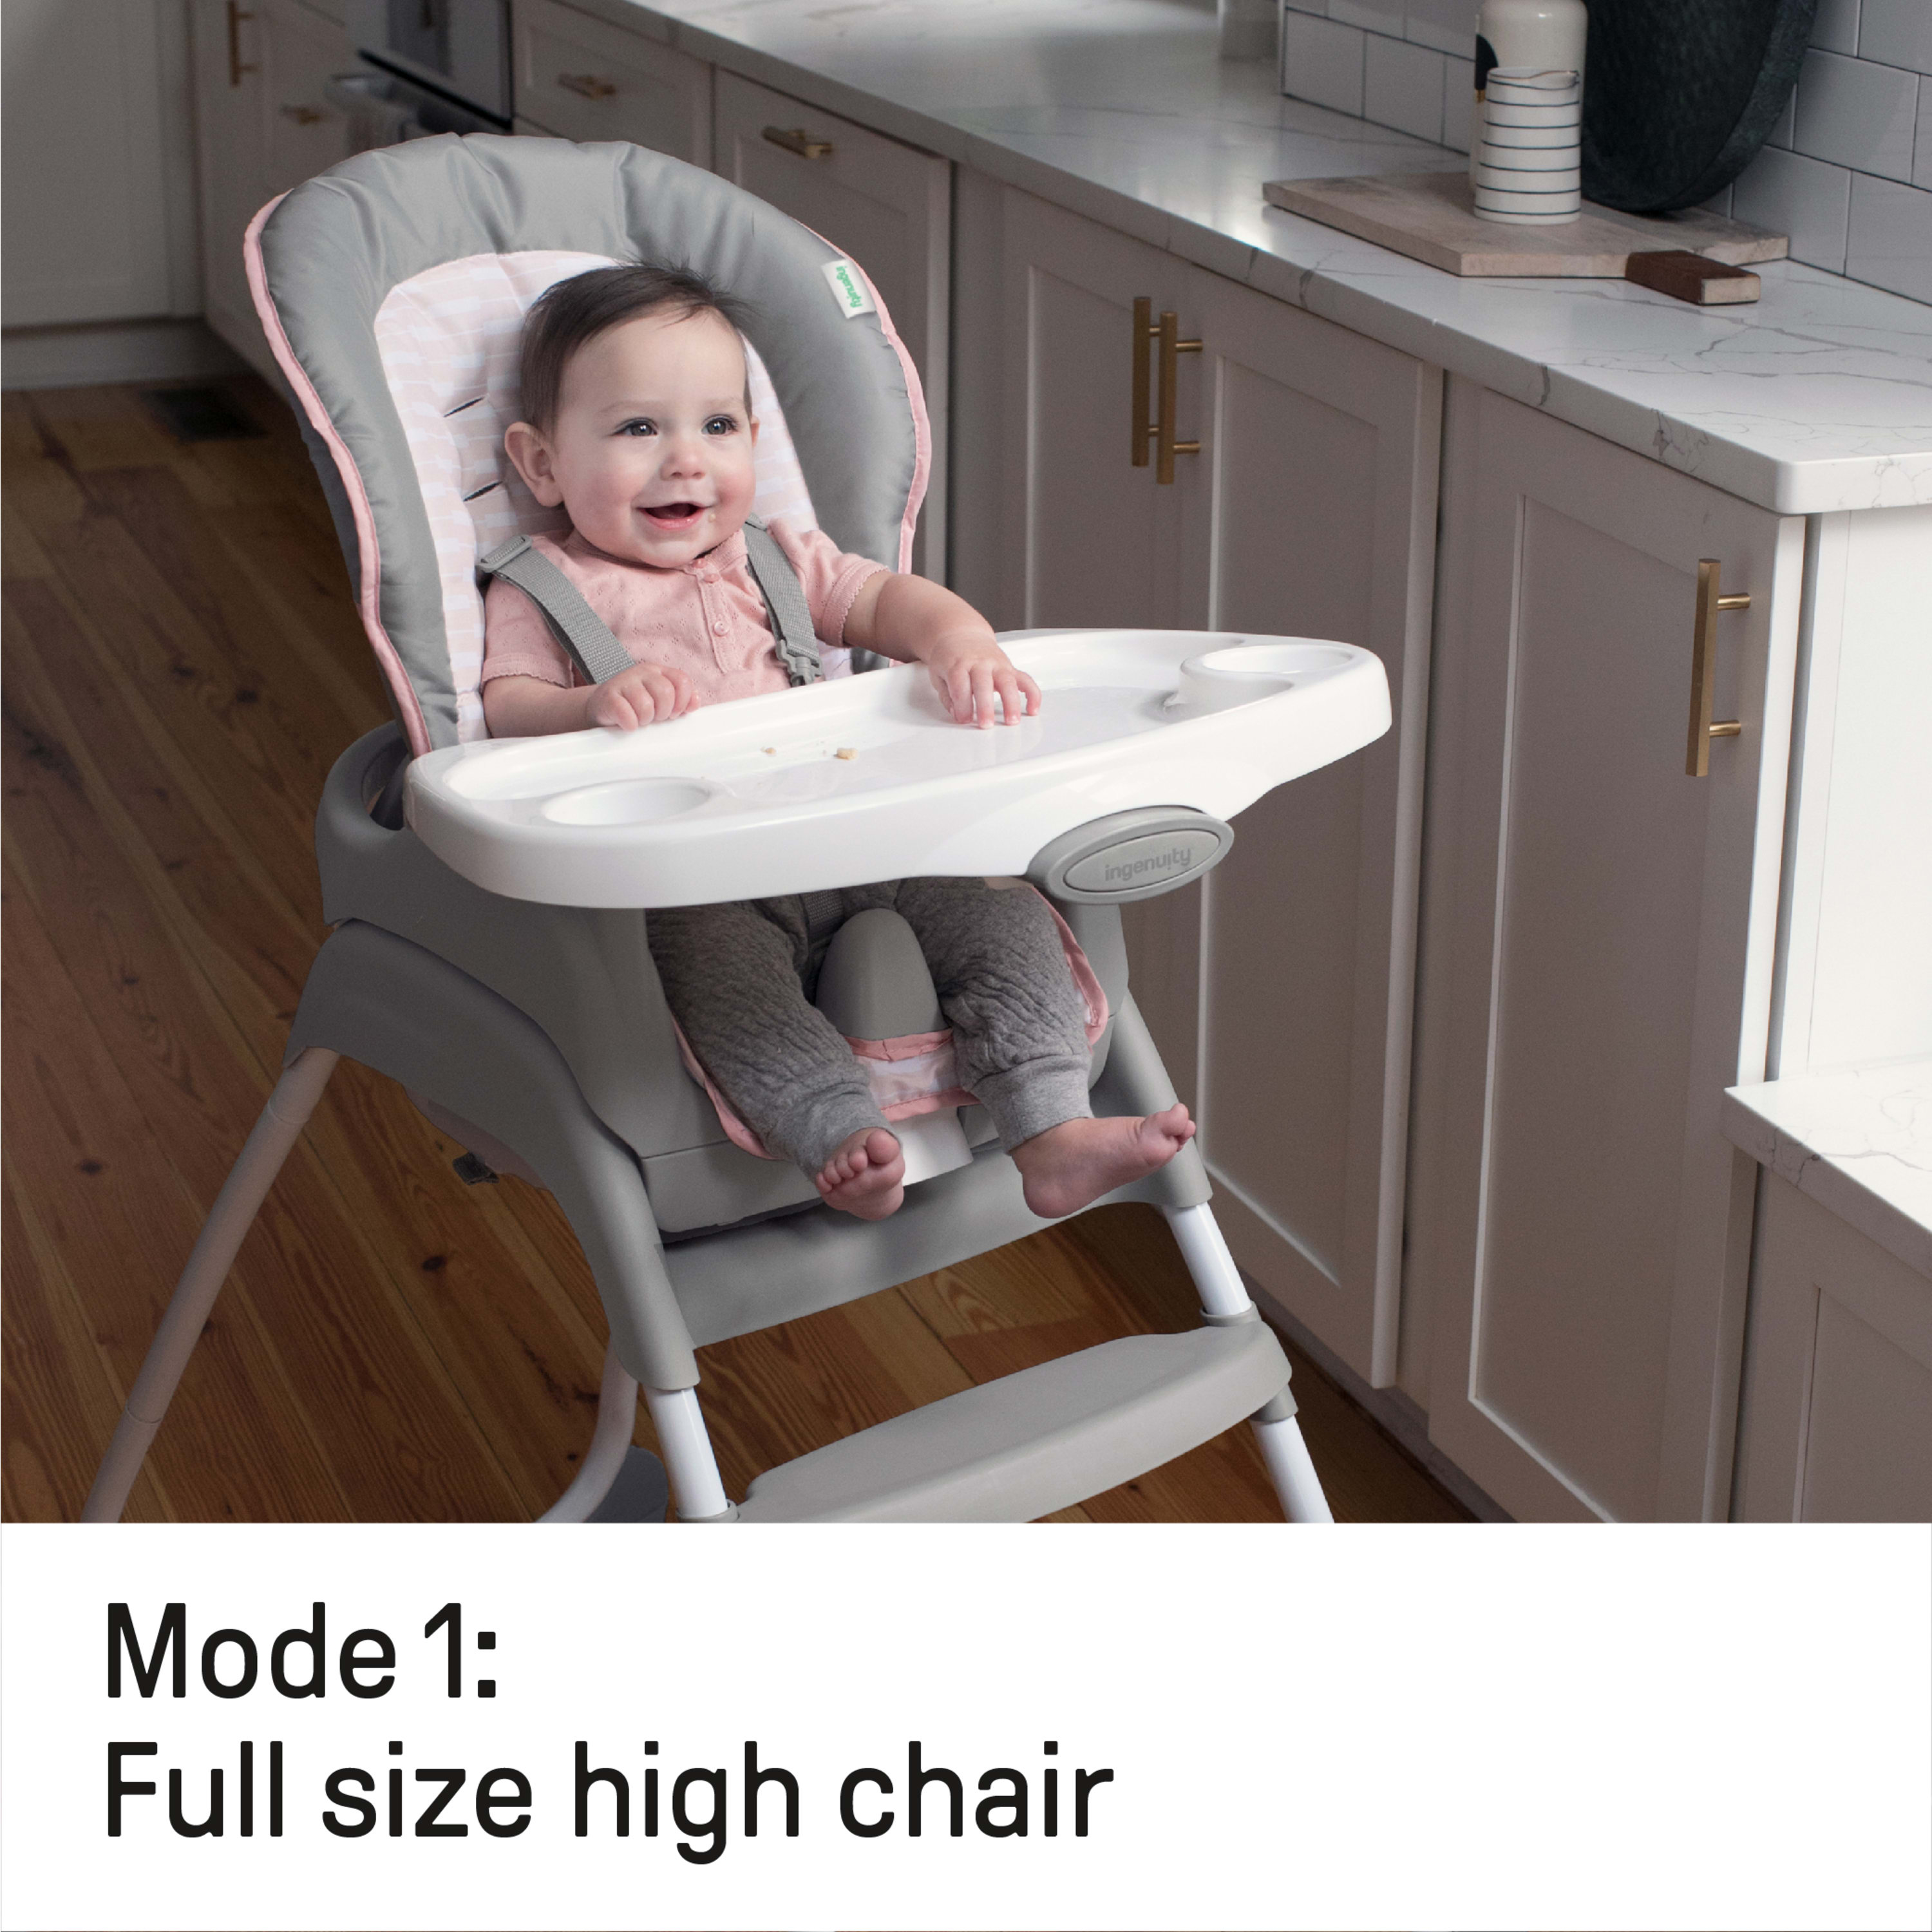 Ingenuity Trio 3-in-1 Convertible High Chair, Toddler Chair, Booster Seat - Flora The Unicorn - image 5 of 18